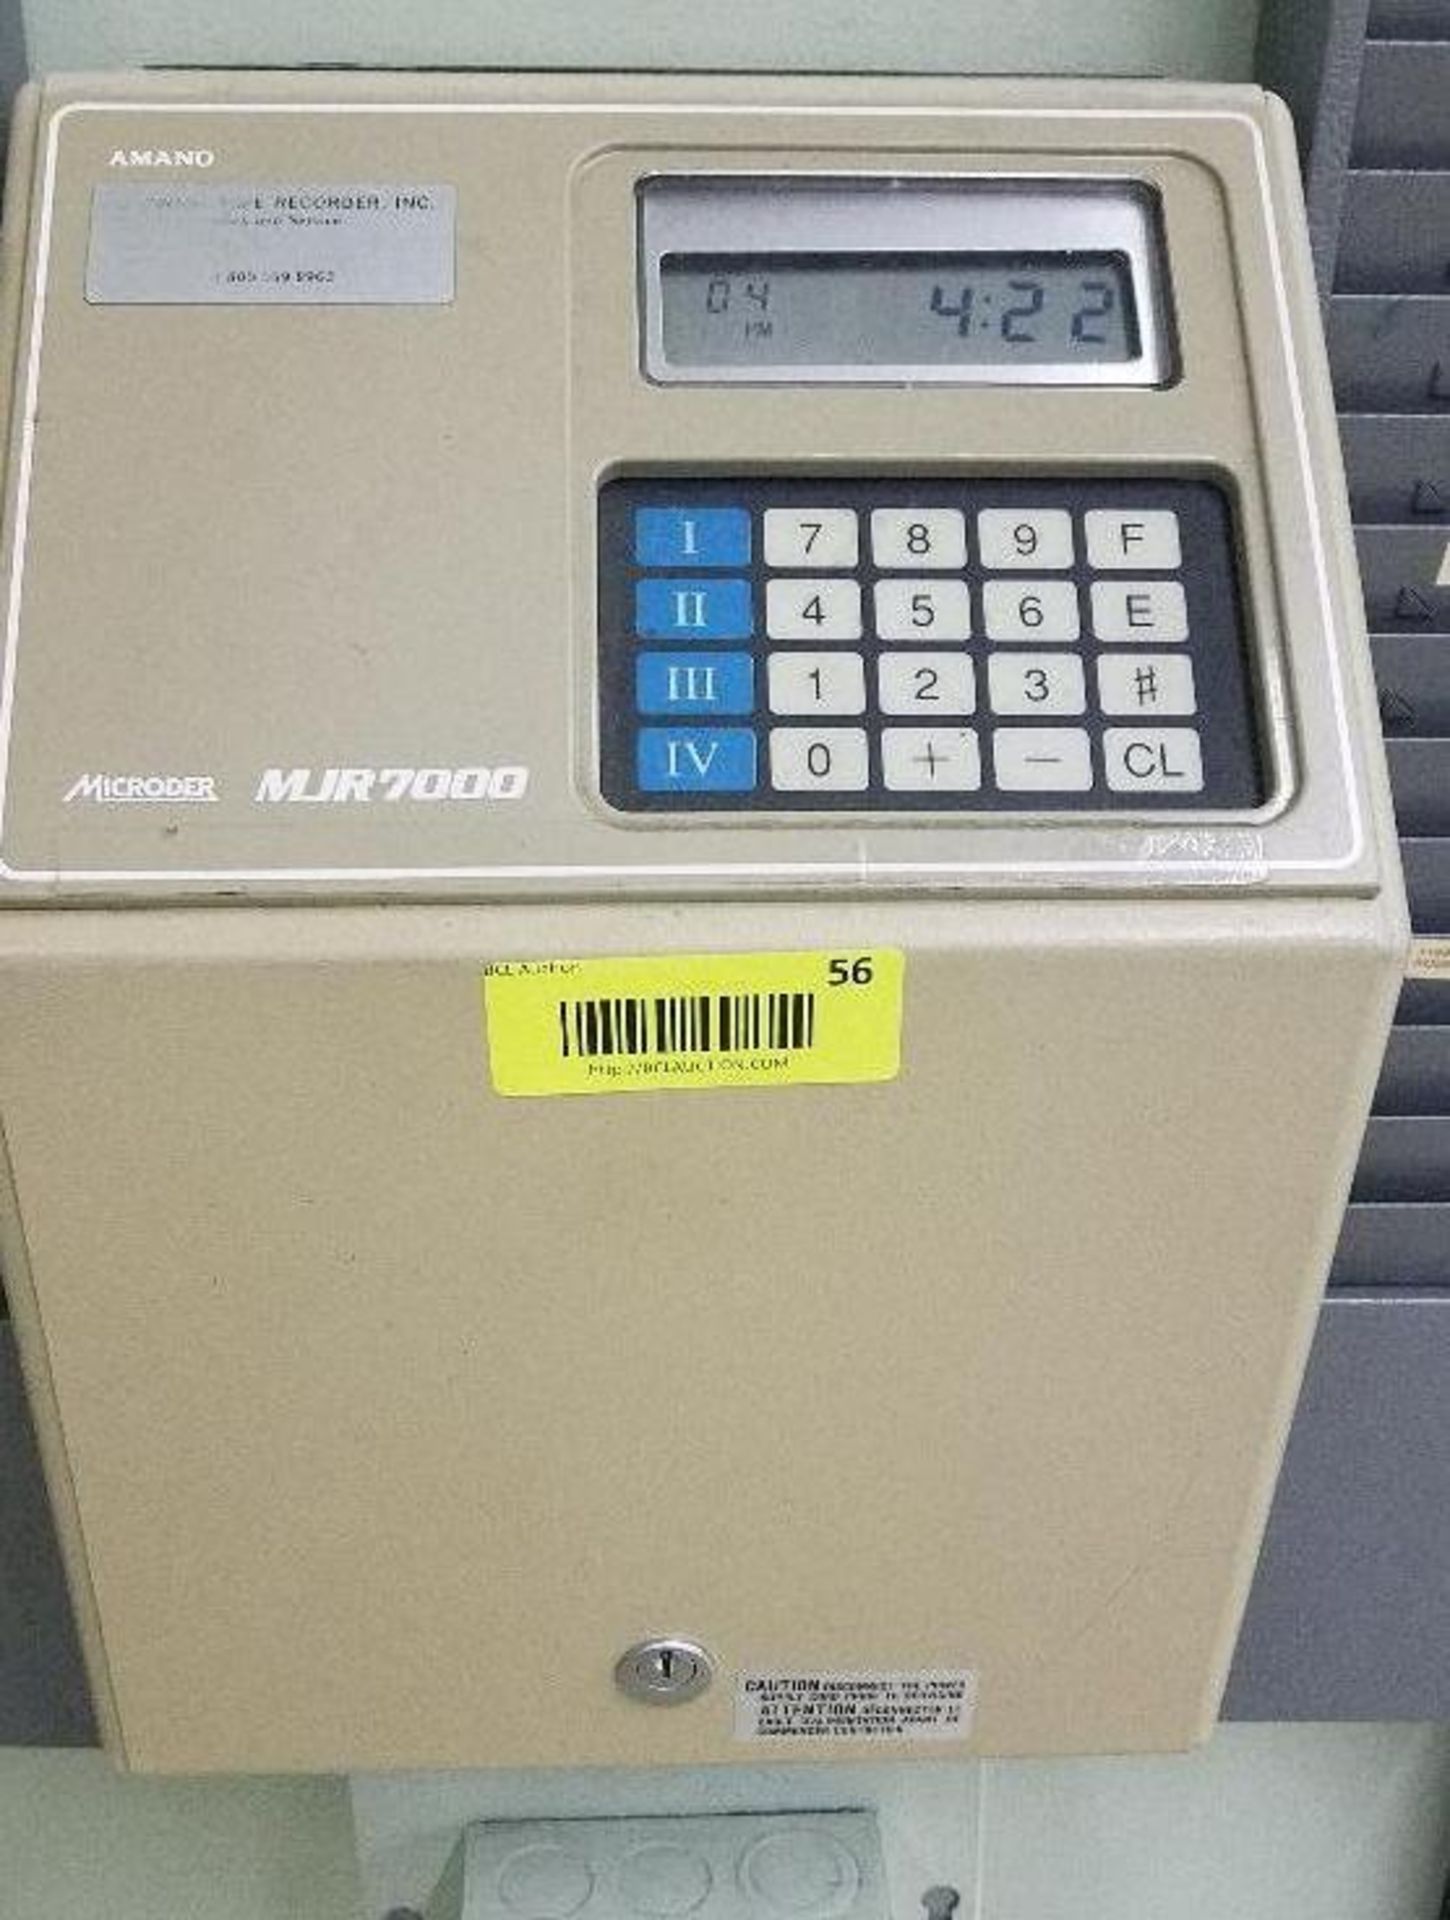 DESCRIPTION: AMANO MICRODER MJR7000 TIME CLOCK W/ (5) METAL TIME CARD TRAYS BRAND / MODEL: AMANO MIC - Image 2 of 3